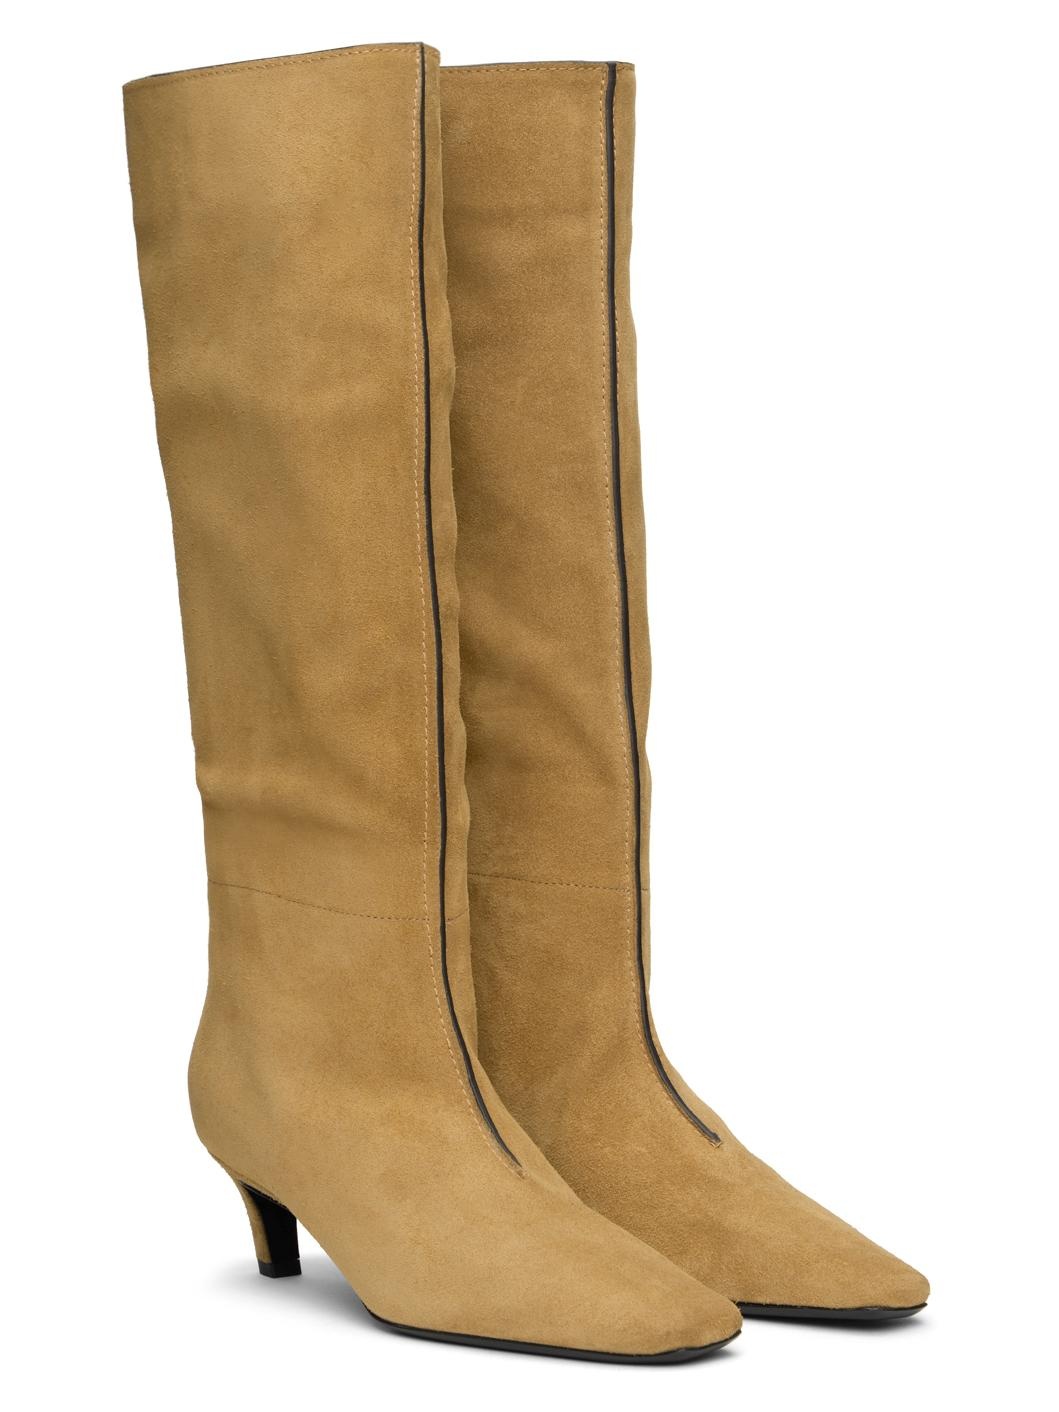 Tan 'The Wide Shaft' Boots - 4